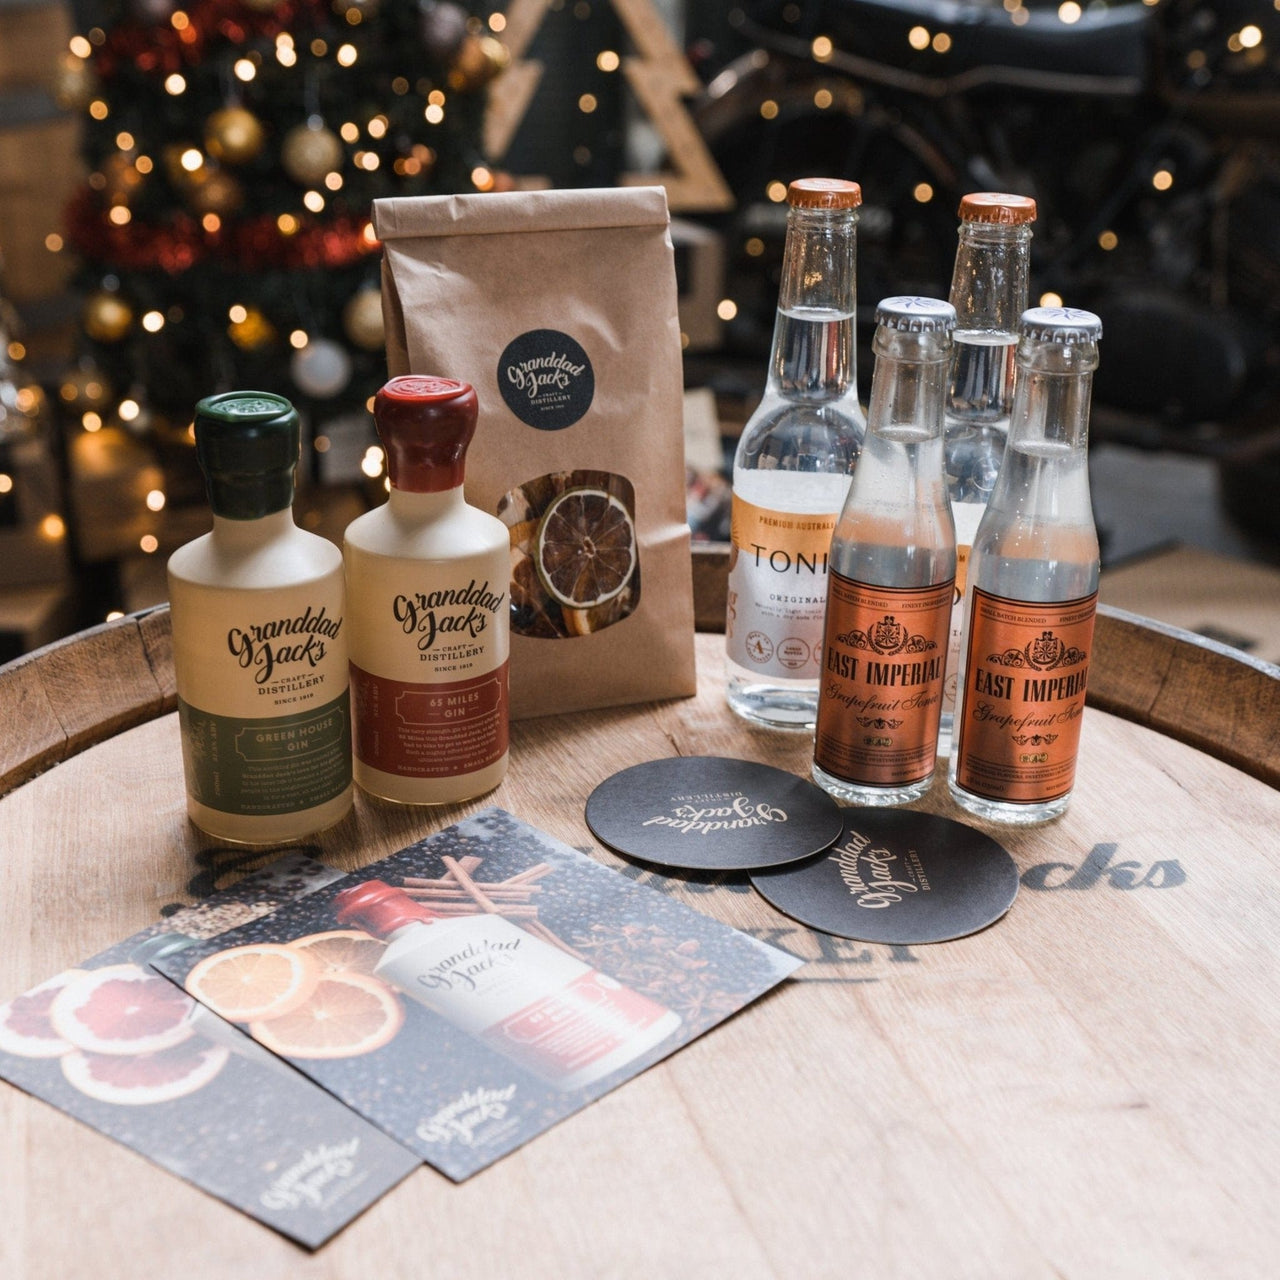 200ml Mix & Match Gift Packs 65 Miles & Greenhouse / Mixed Tonic (4pck) + Garnishes - Granddad Jack's Craft Distillery